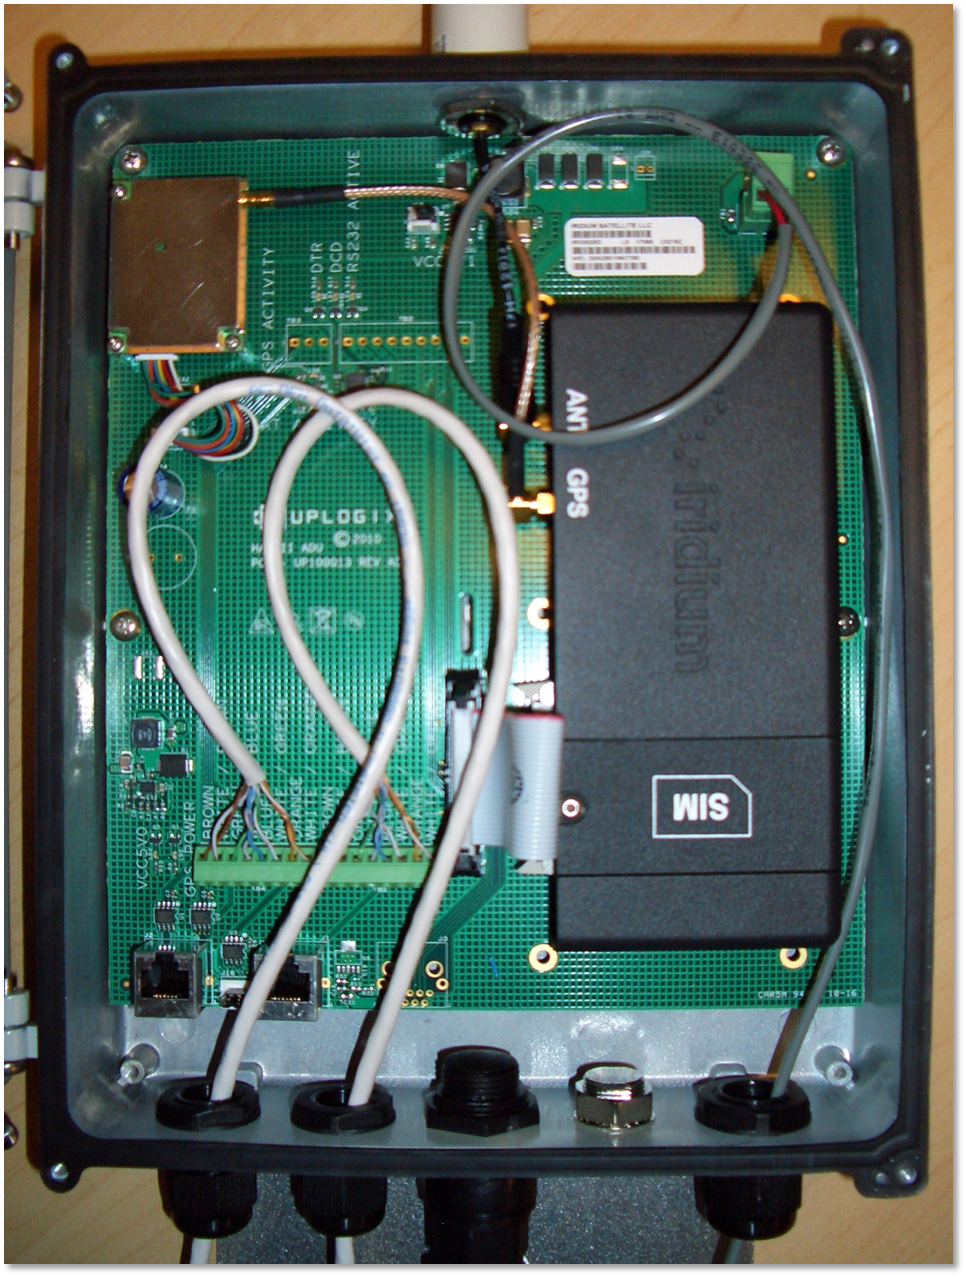 Above Deck Unit with RJ-45 Wiring